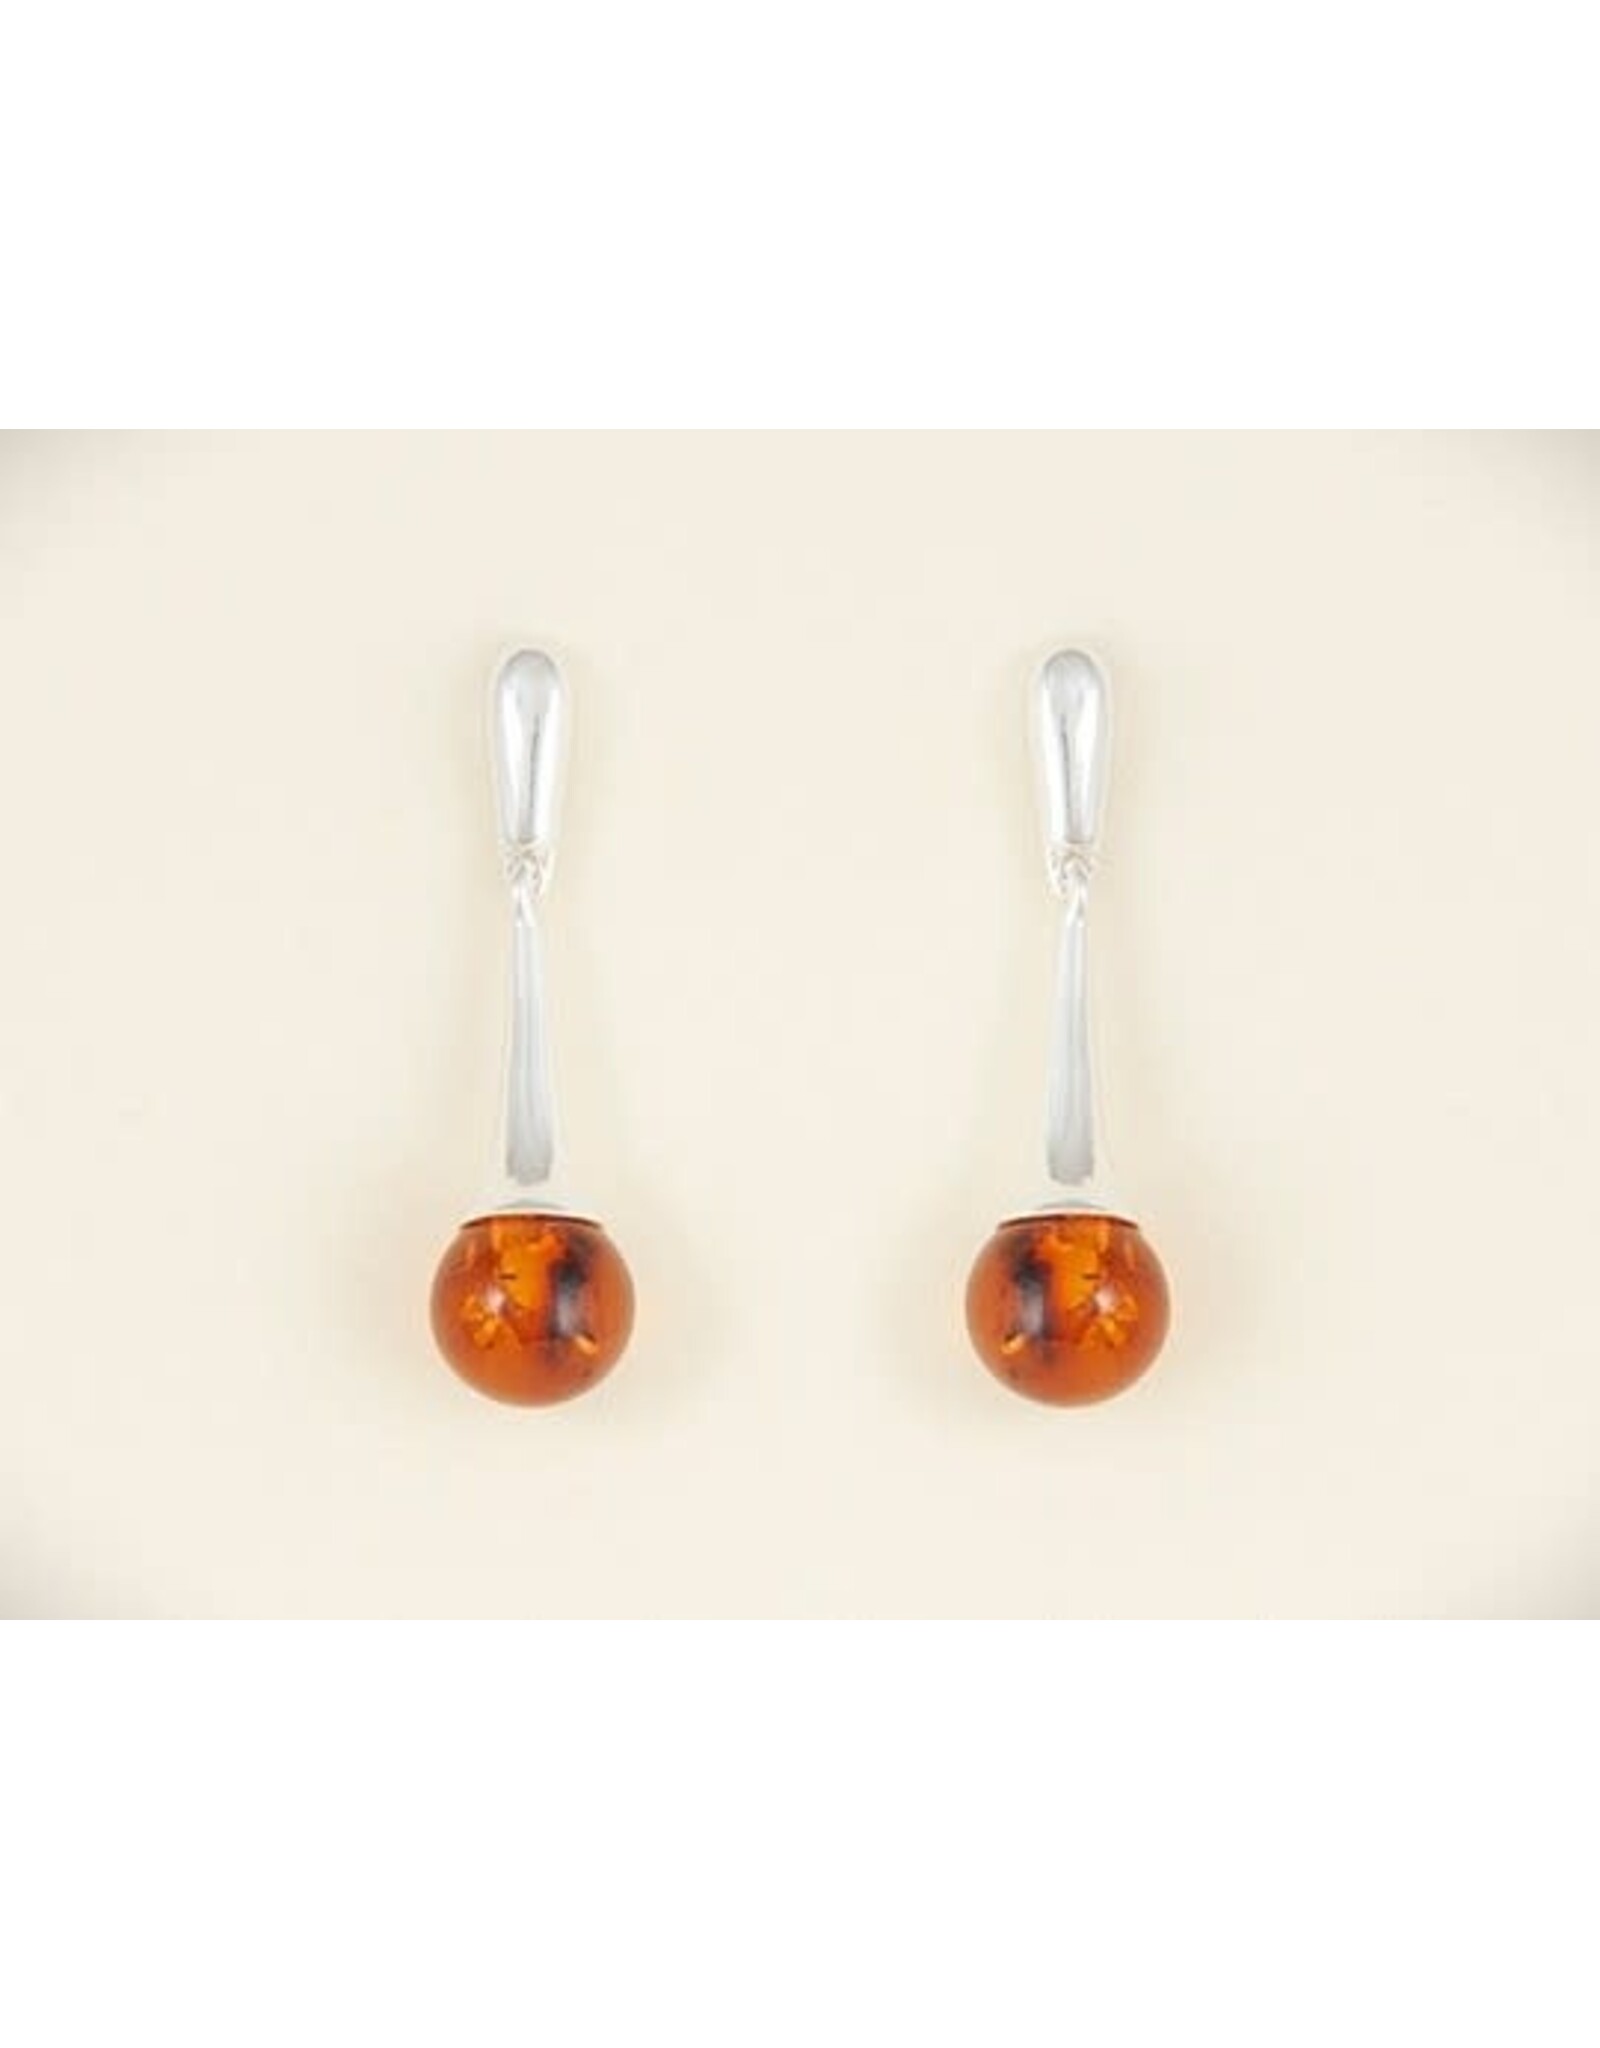 Baltice Amber Sterling Silver Earrings Small Round Drop